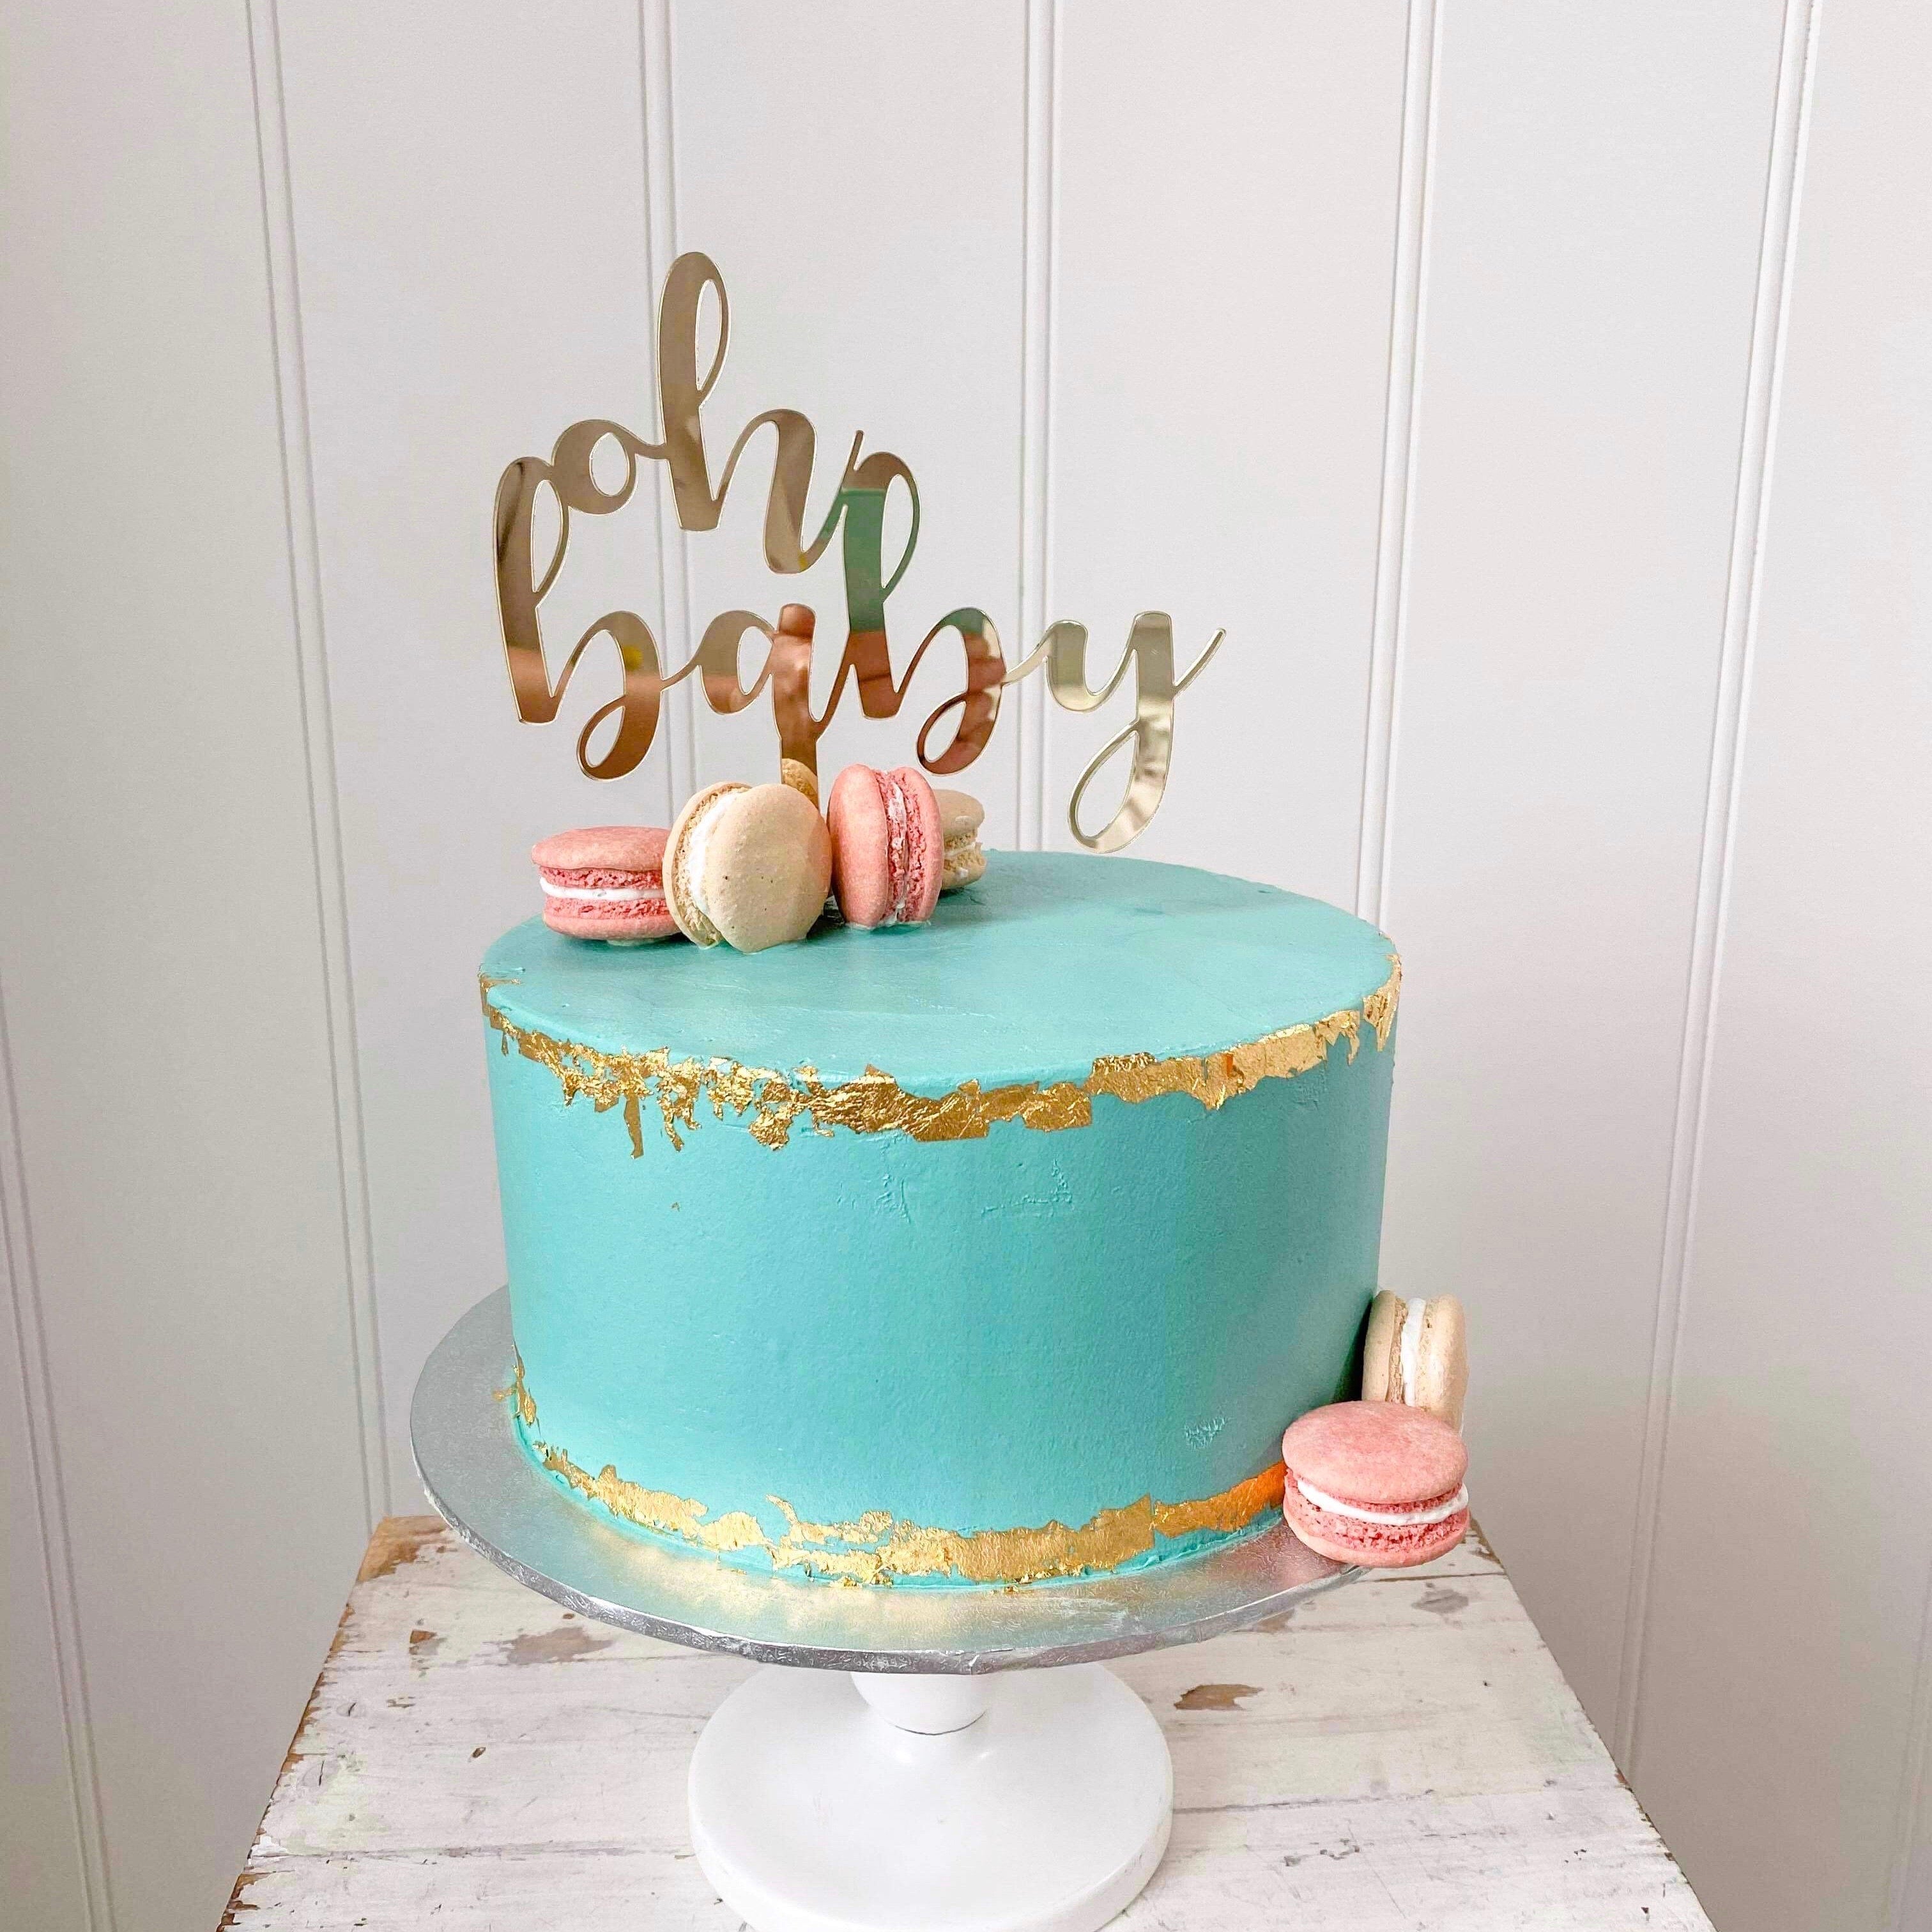 Design Your own- Buttercream smooth with metallic edge